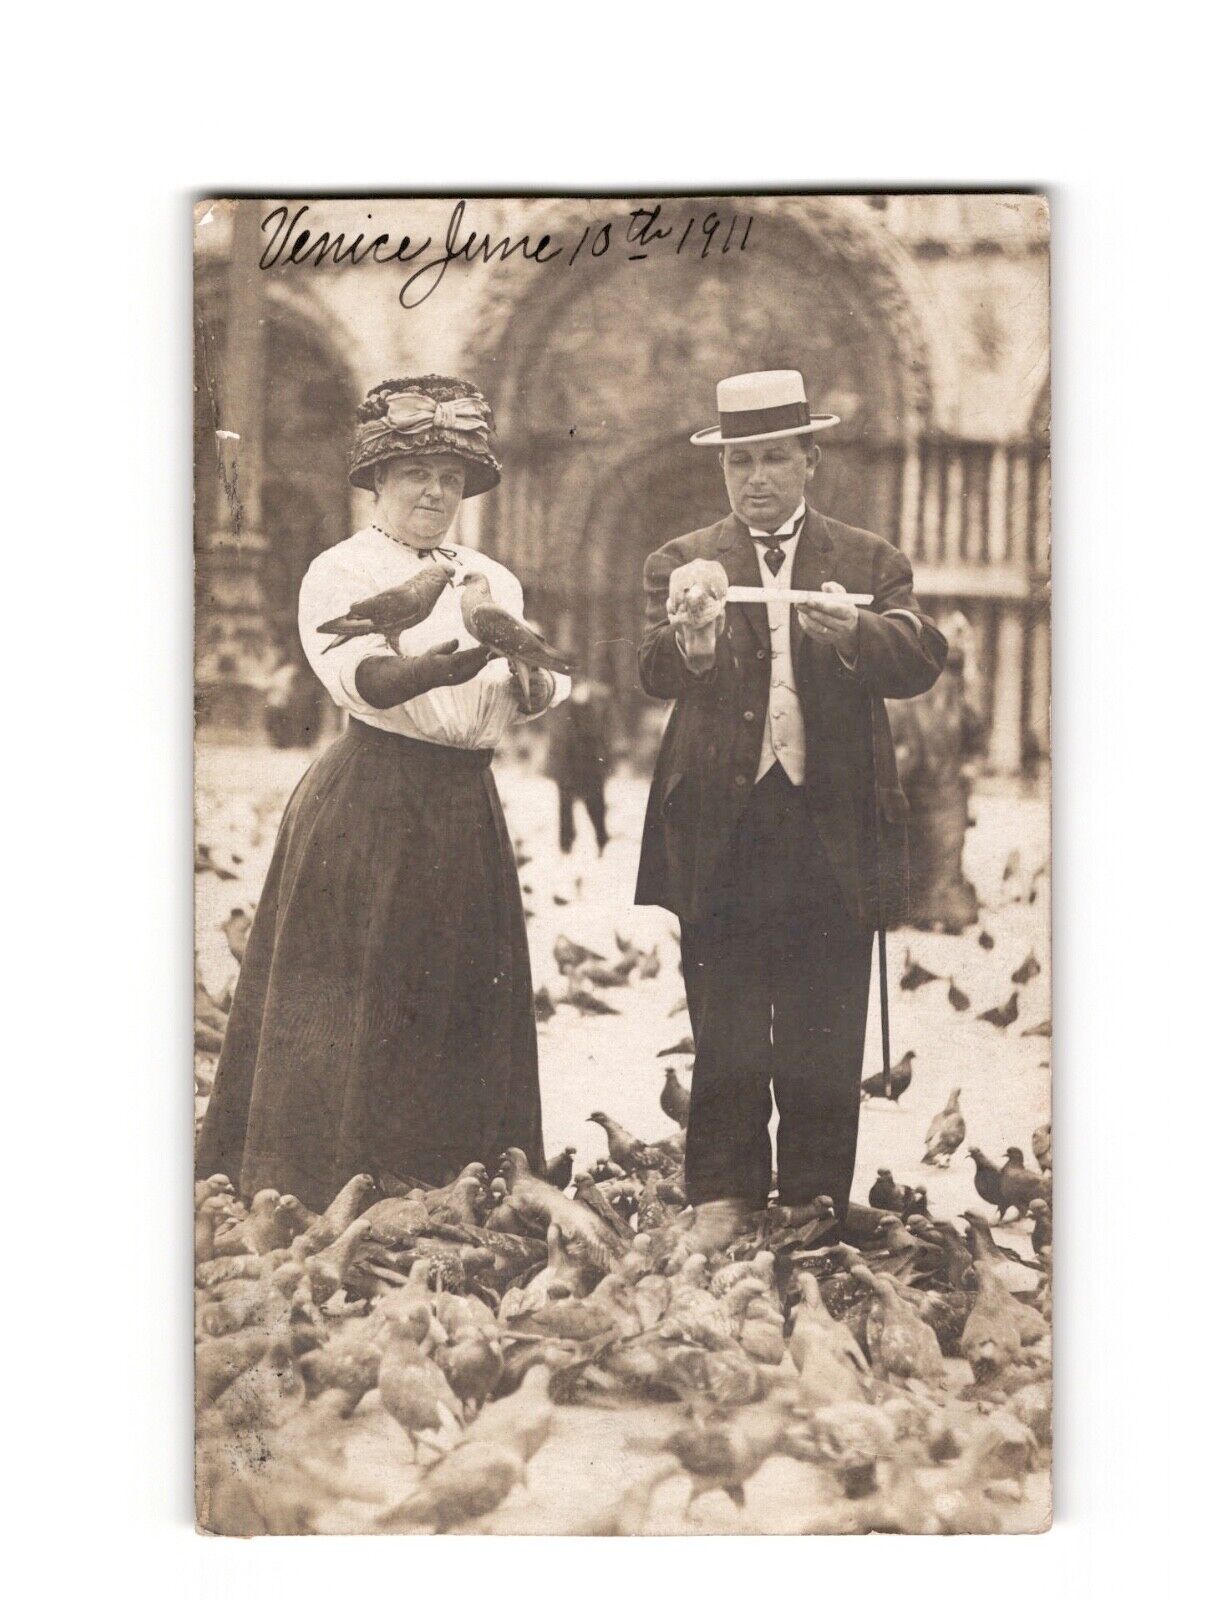 RPPC Vintage Postcard 1911 Venice Italy St. Mark's Square Pigeons Mailed to NYC